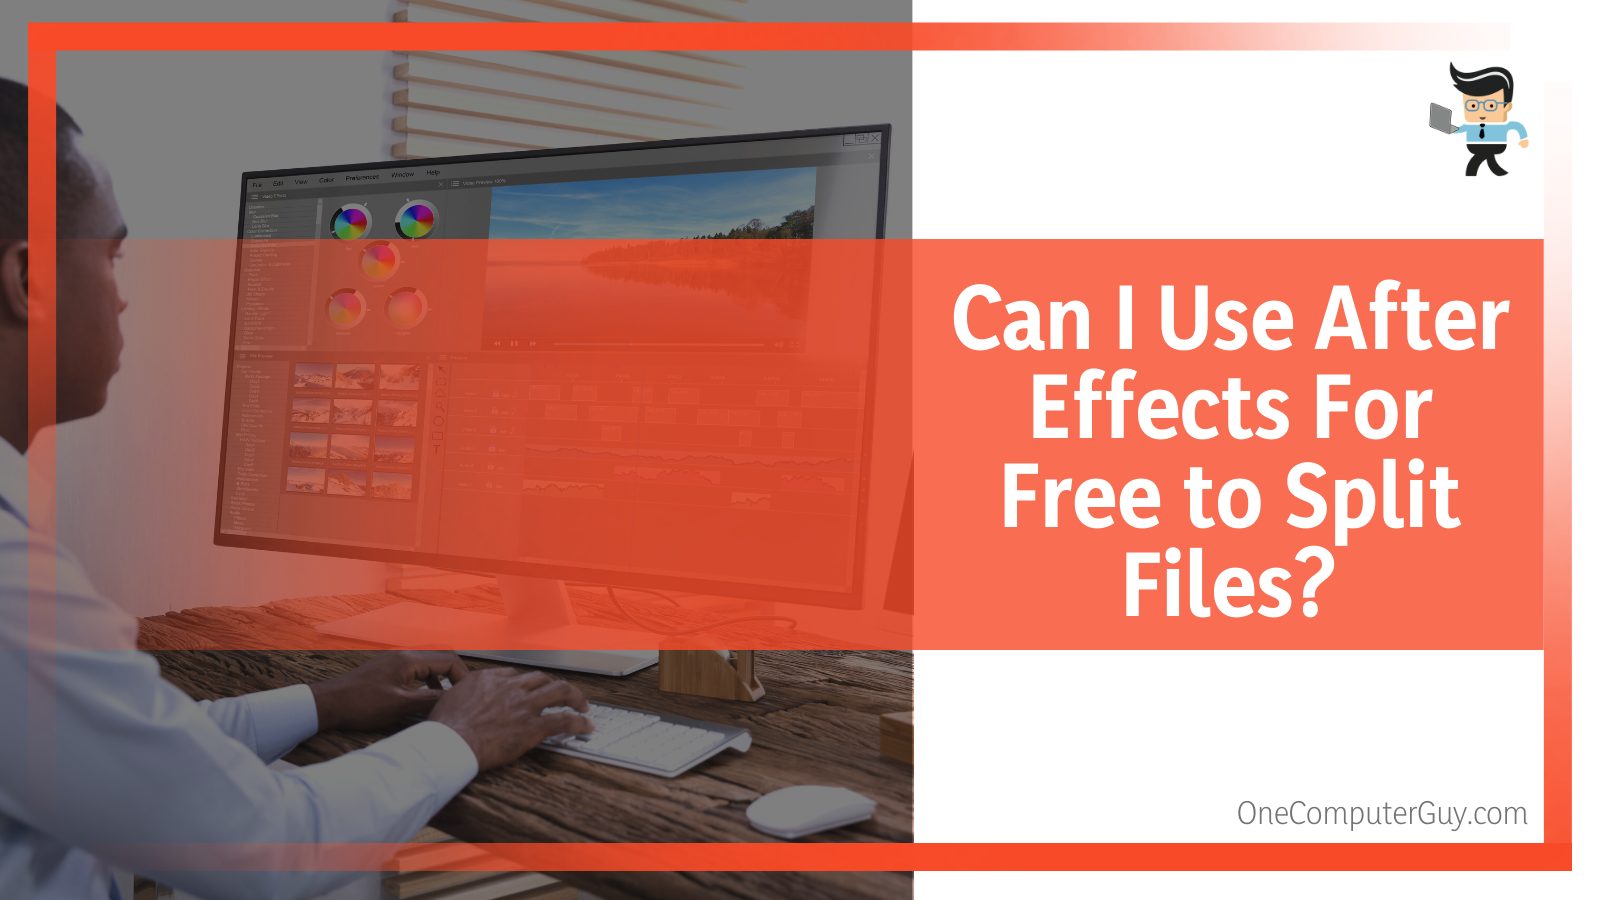 Can I Use After Effects For Free to Split Files